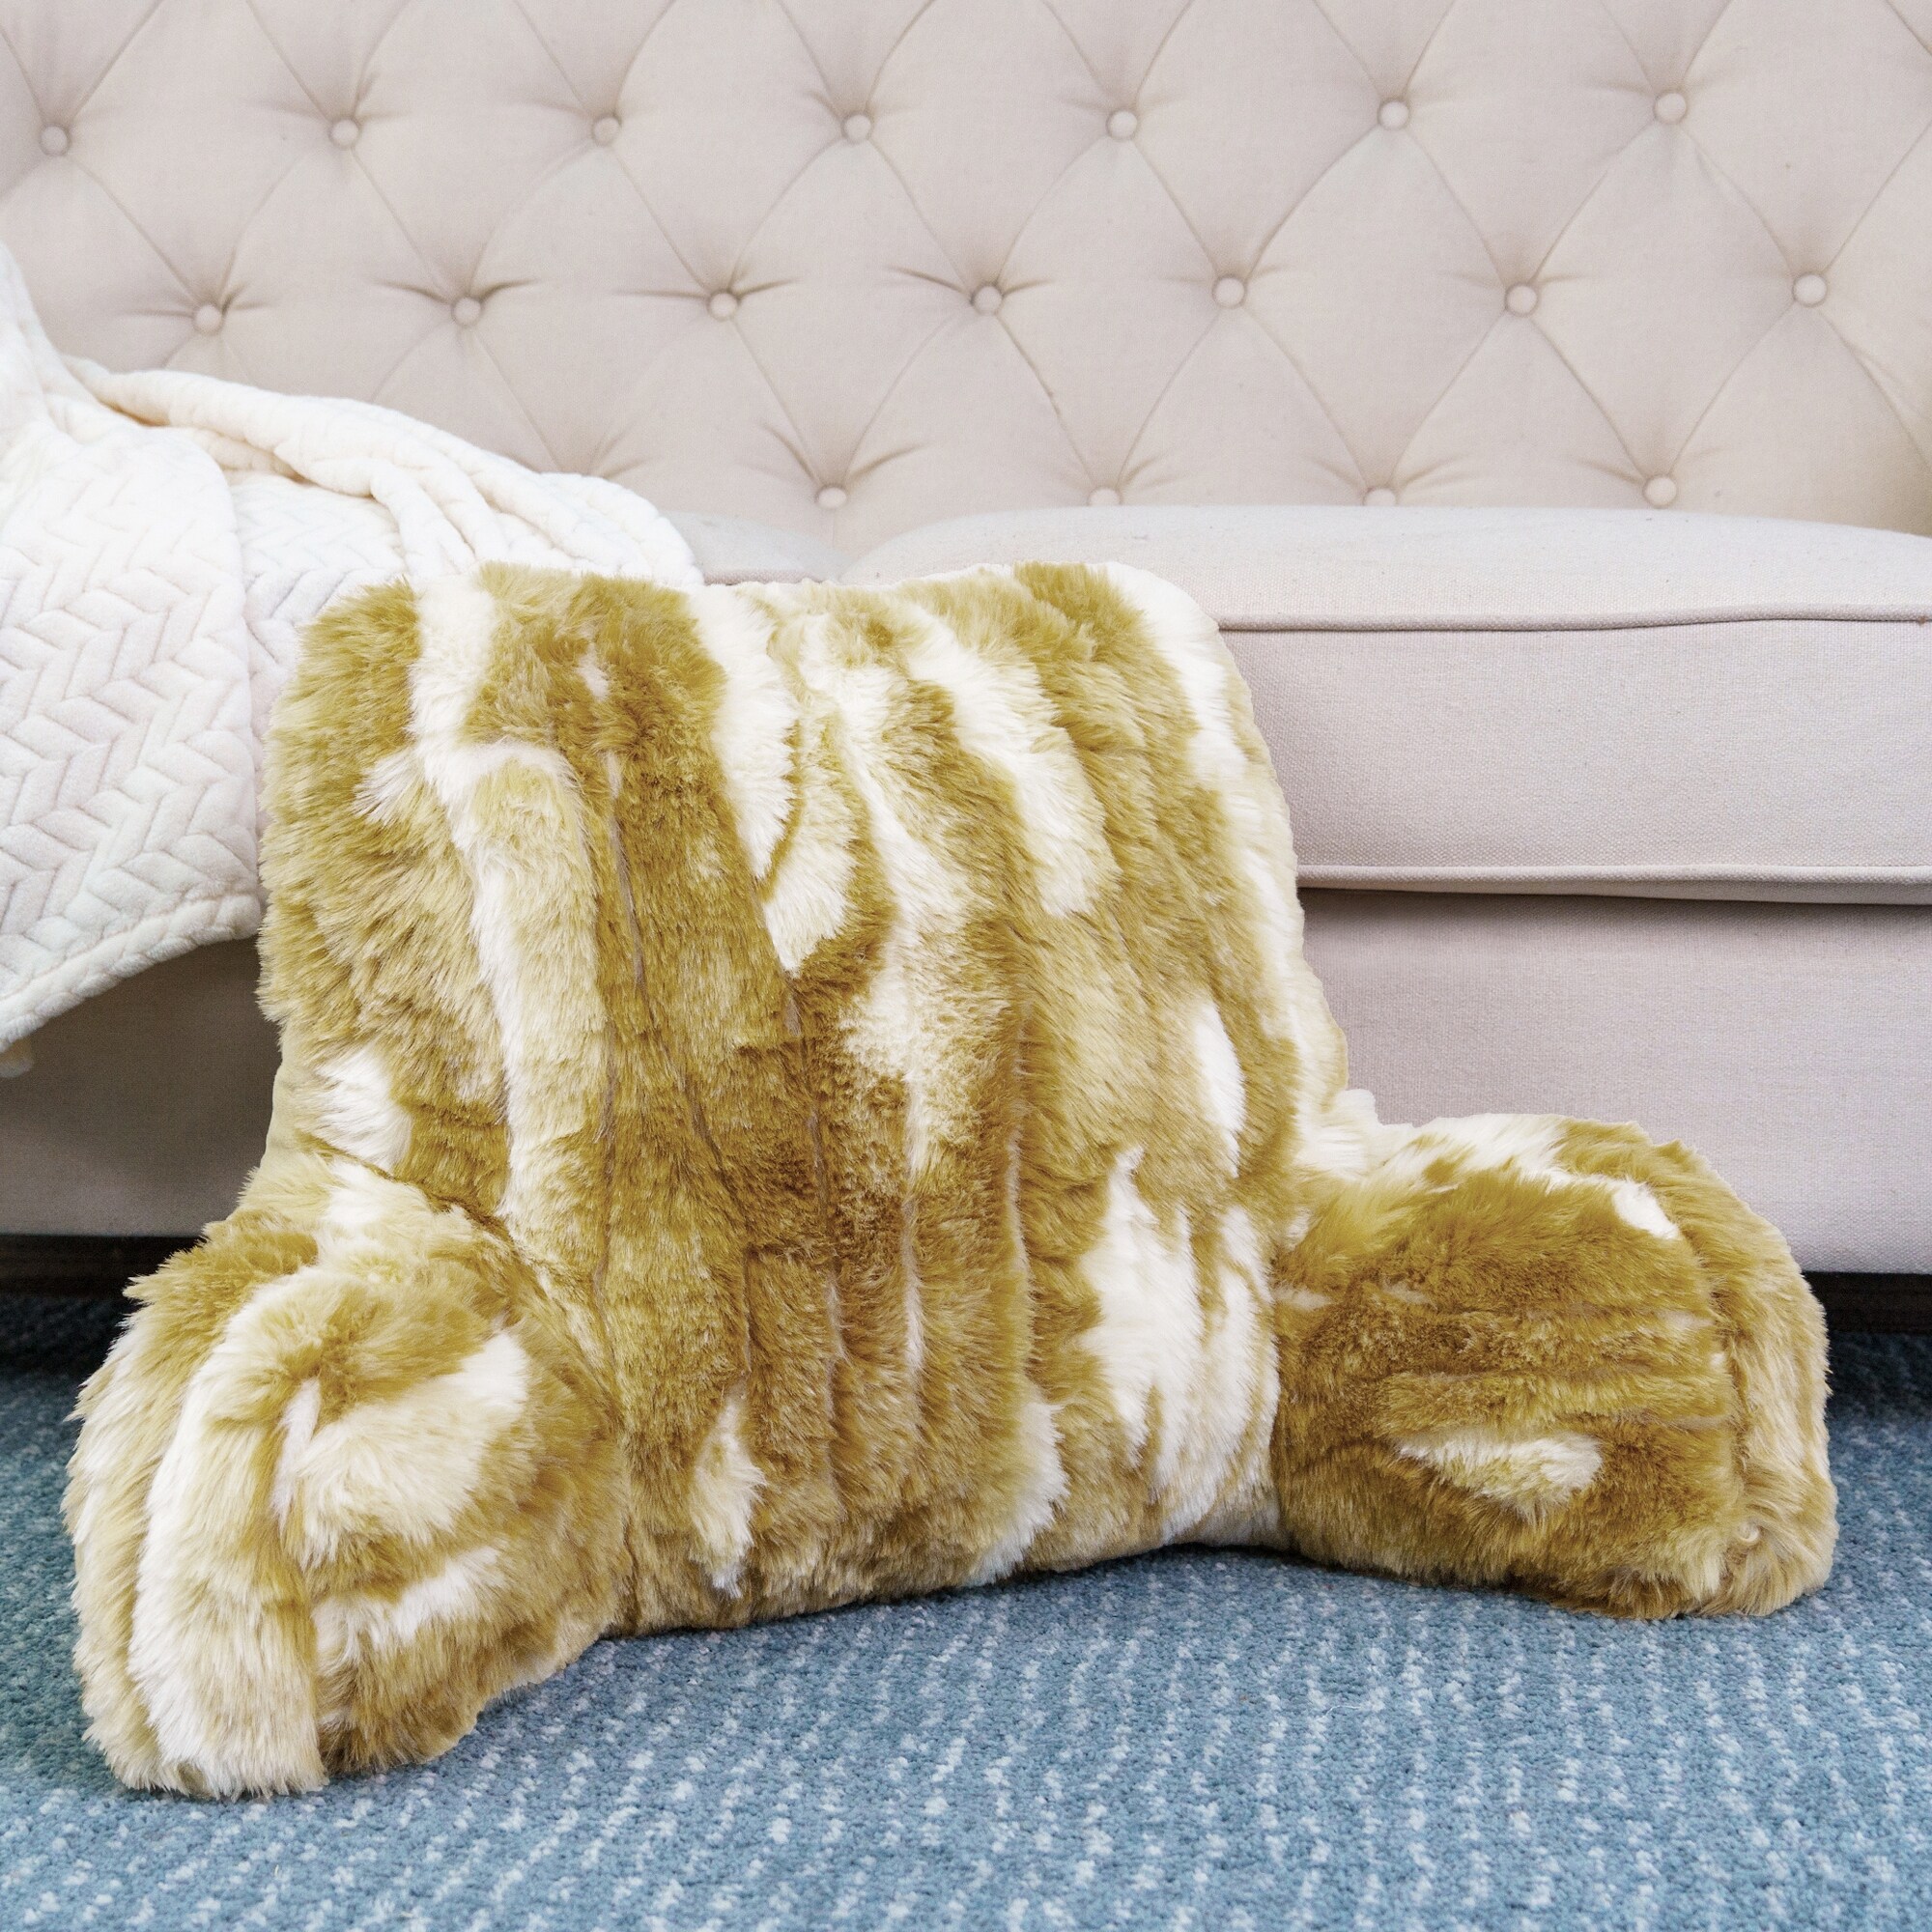 https://ak1.ostkcdn.com/images/products/is/images/direct/c0e663a815f4cfcd6ff565d3fa95d9b6d48e1fcc/Home-Soft-Things-Jacquard-FauxFur-Bed-Rest-Reading-Pillow-Cover-%26-Filling%2C-NEED-ASSEMBLY%2C-20%22-x-18%22-x-17%22.jpg